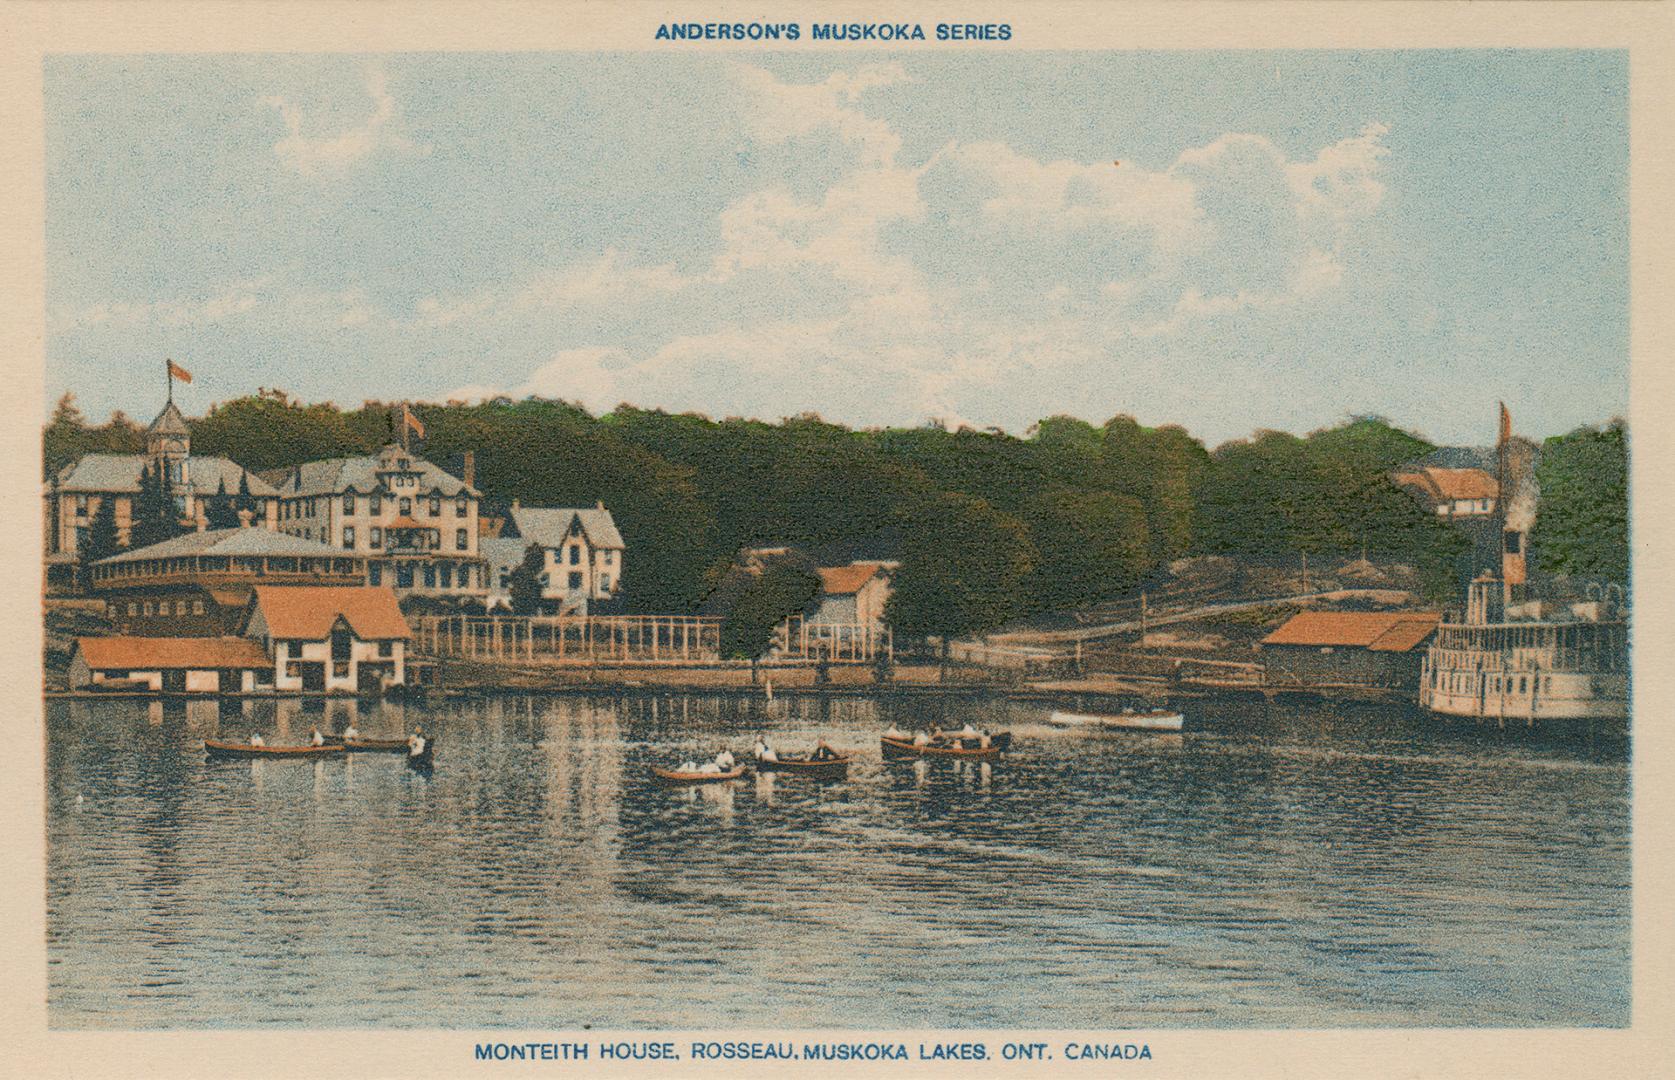 People in canoes sailing on a lake in front of a large hotel.